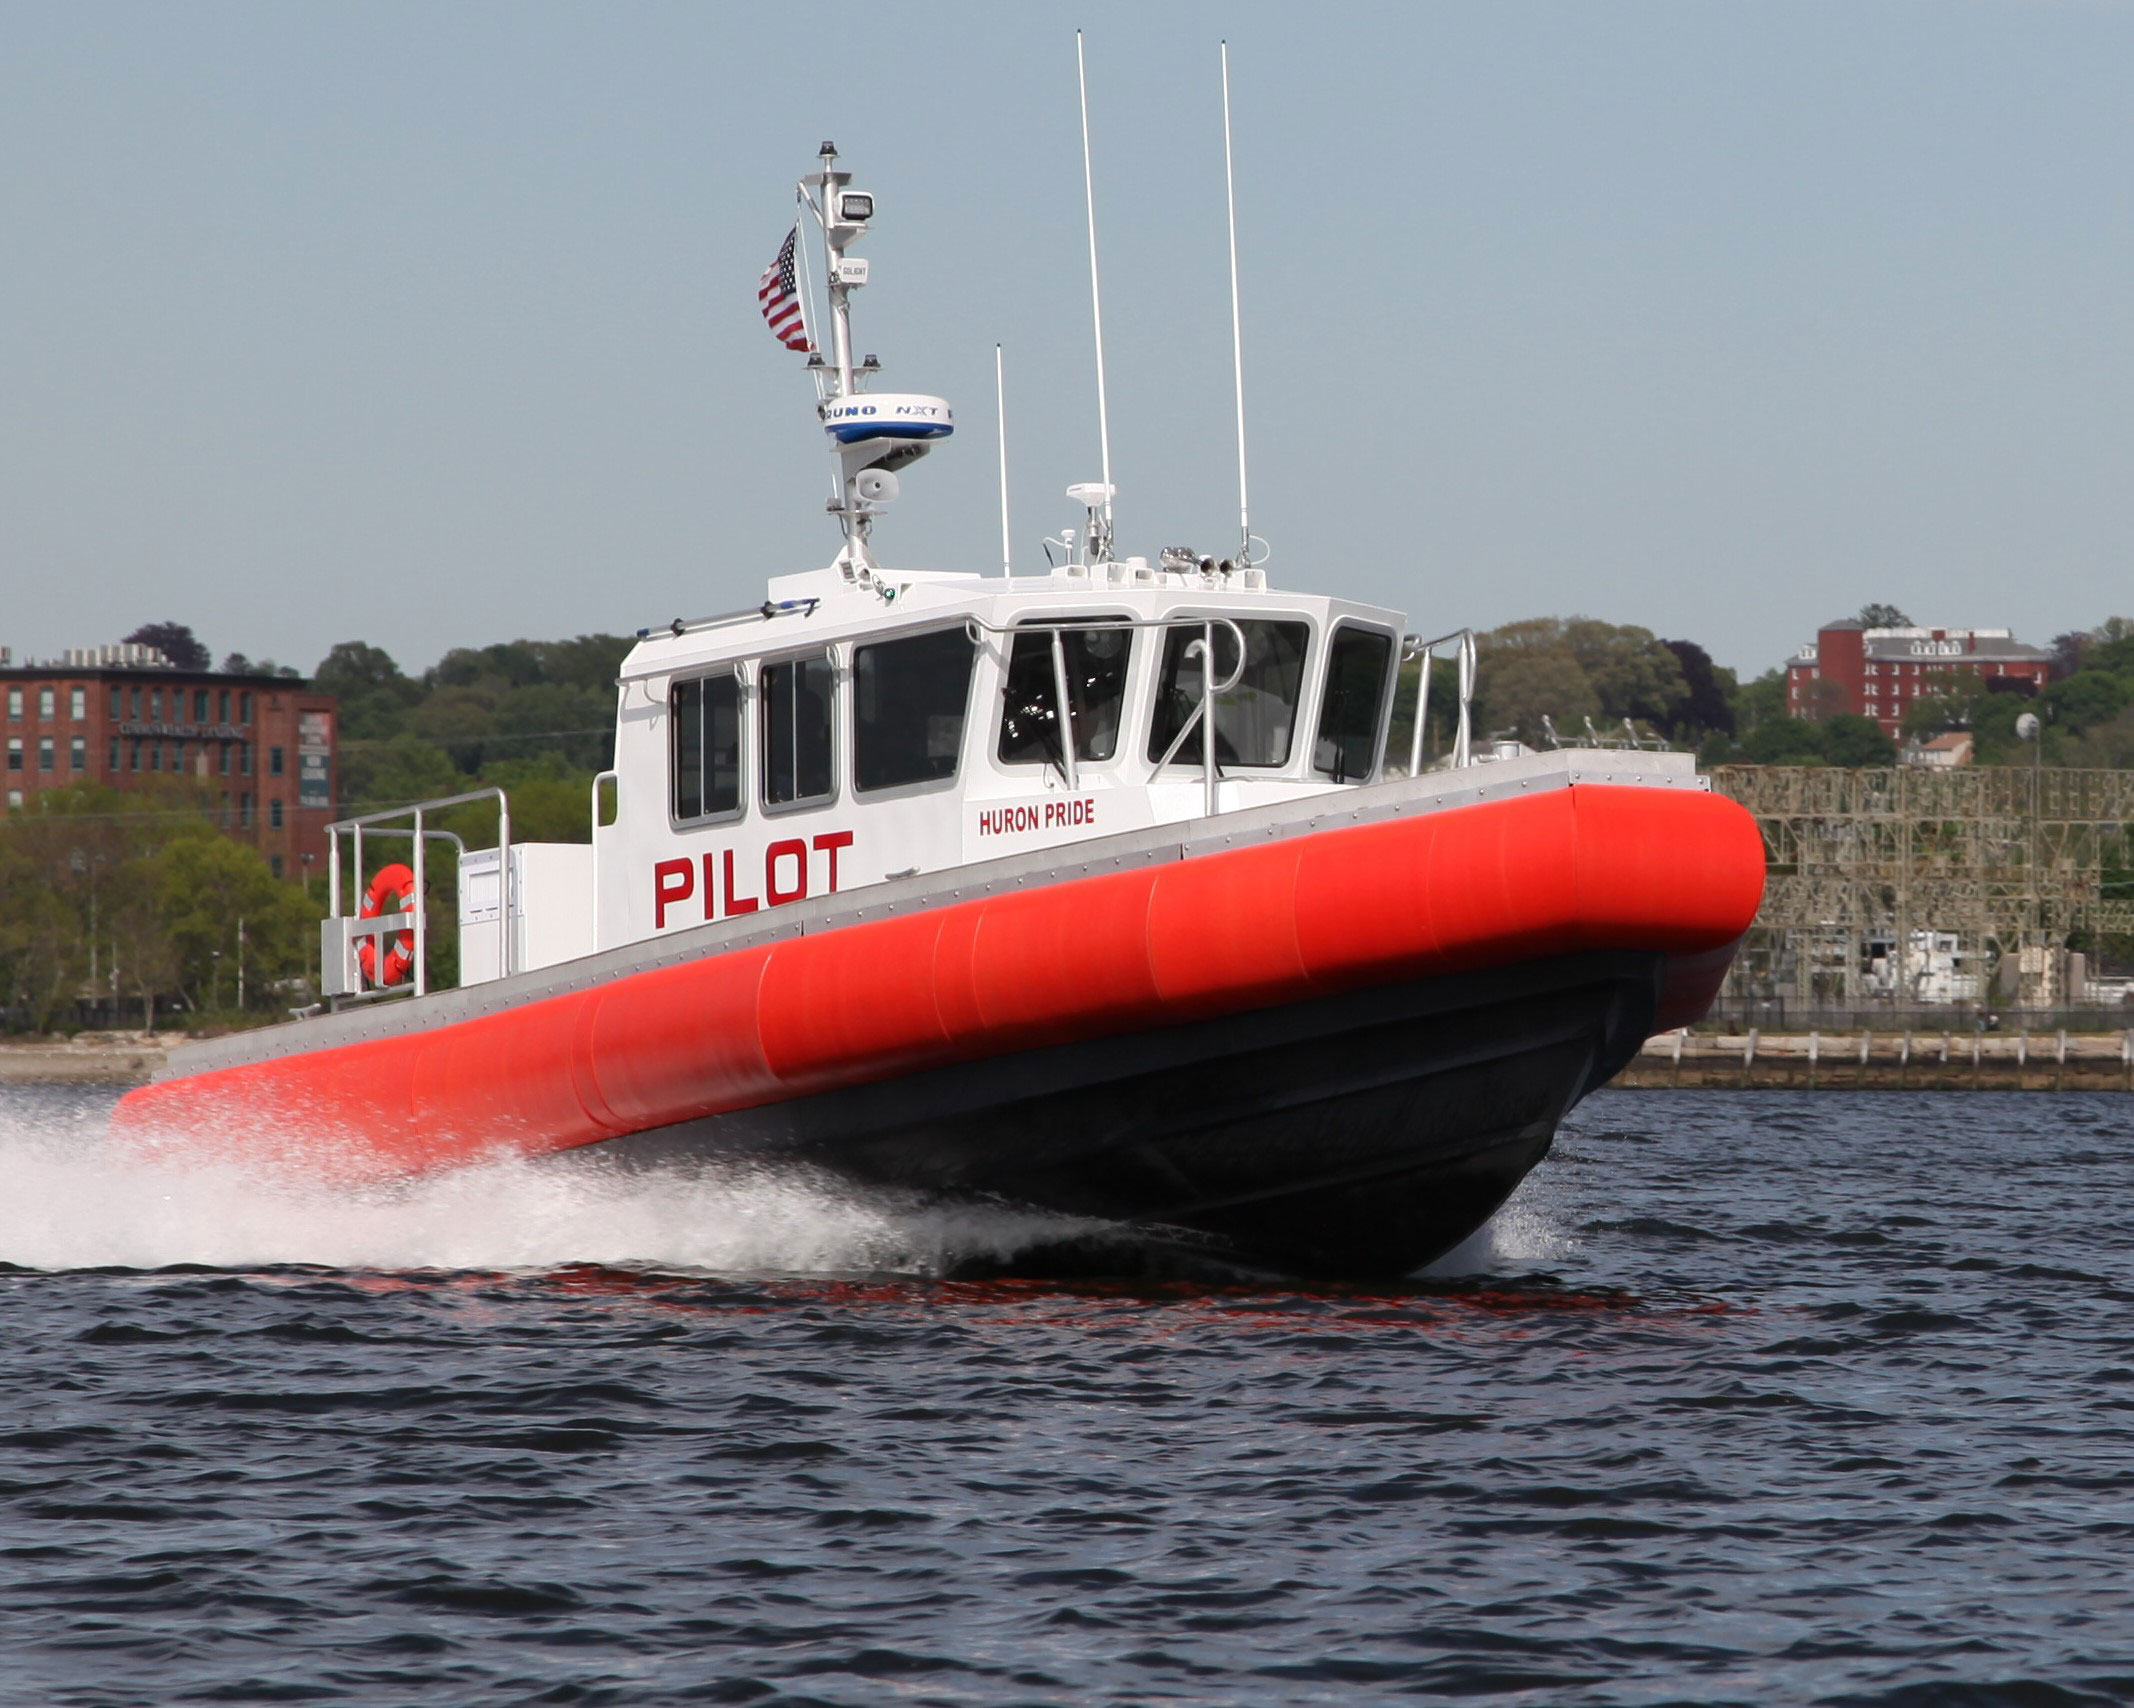 The 42.5-foot Huron Pride complements two larger boats already operated by the Lakes Pilots Association. The new launch can hit speeds faster than 37 knots.